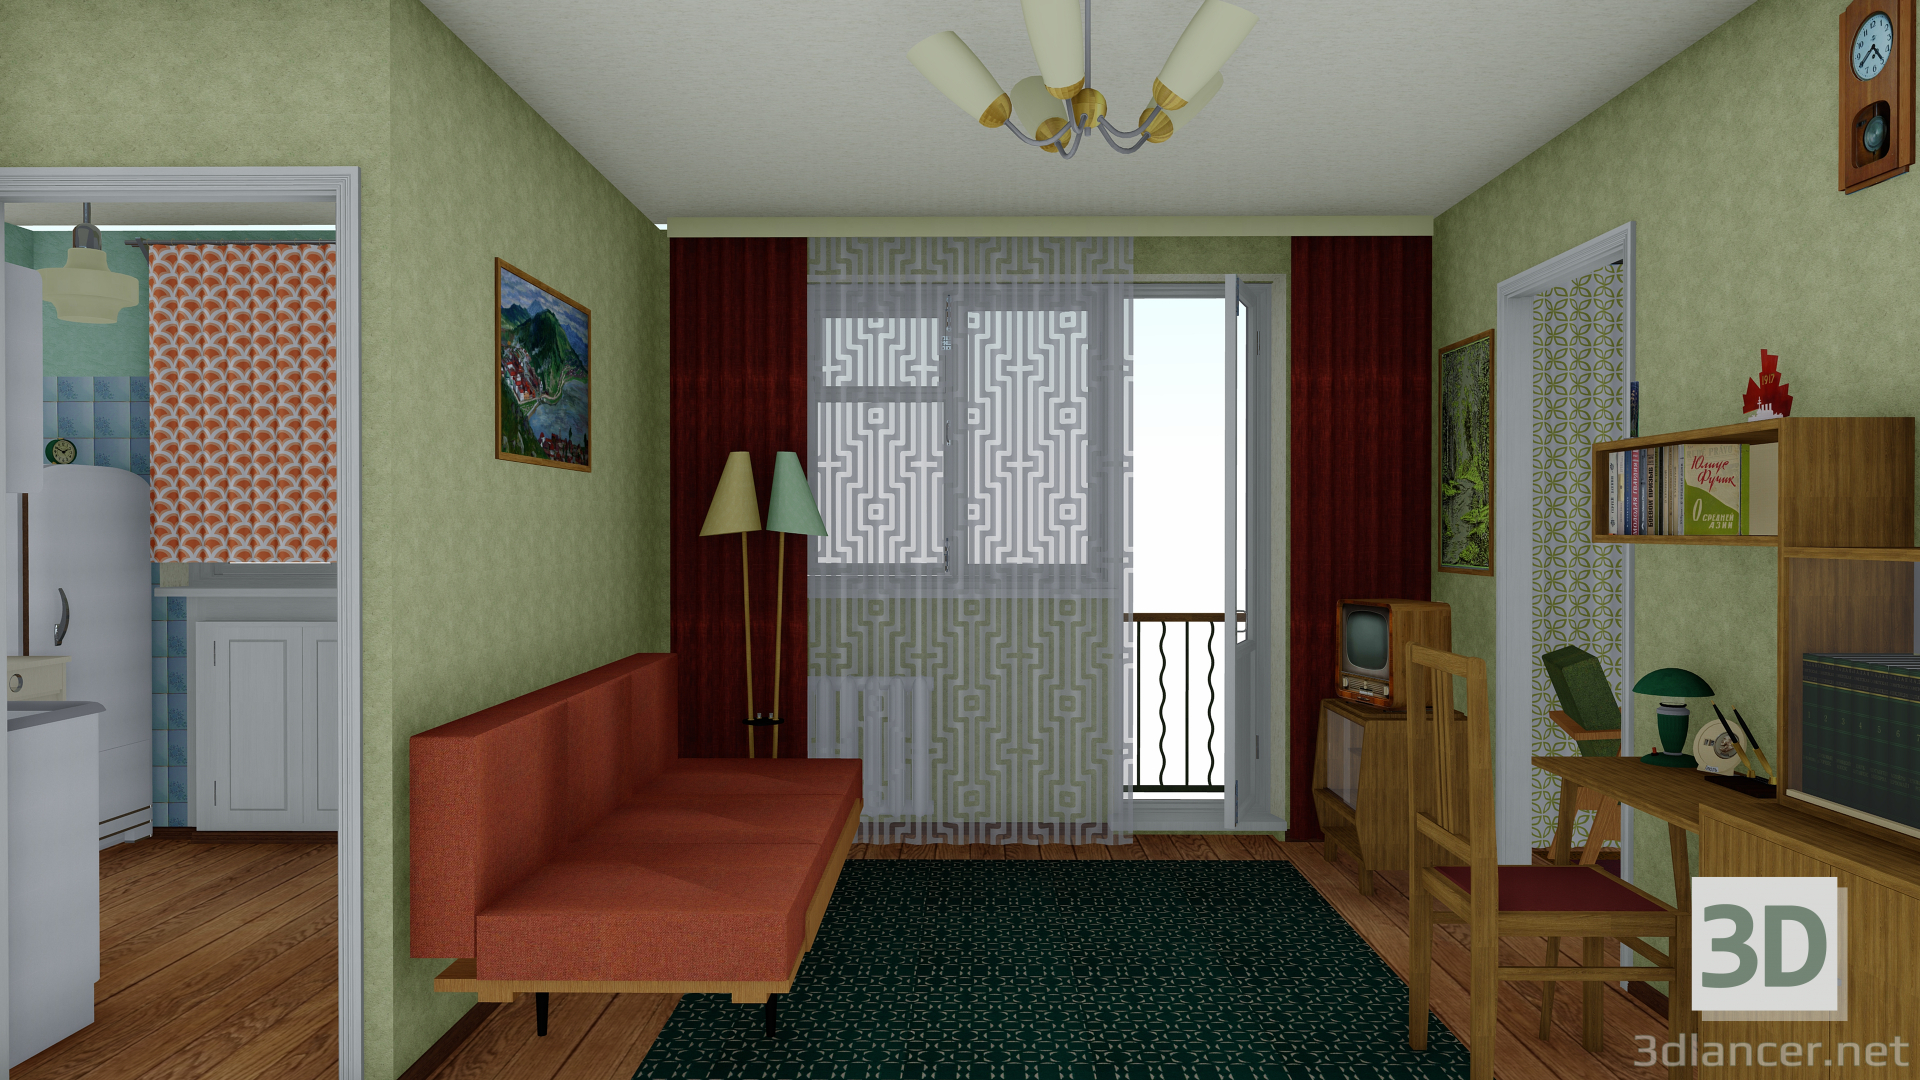 3d Khrushchevka with a Soviet apartment of the 60s model buy - render